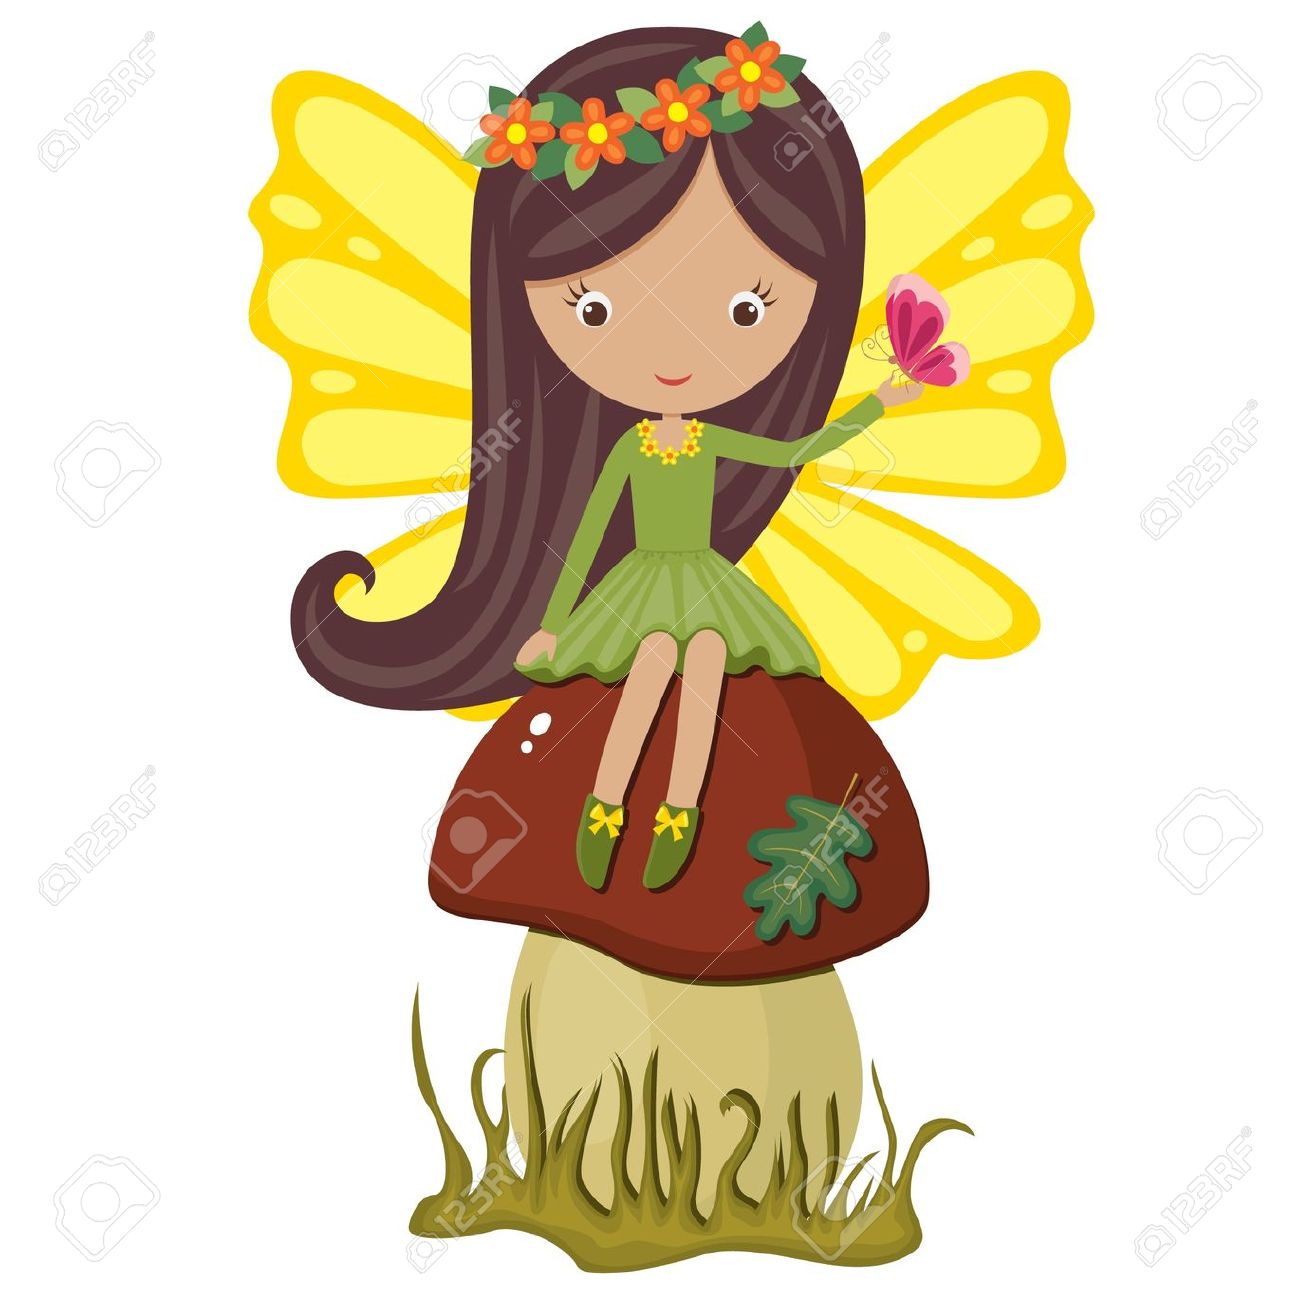 Elf Fairy clipart #6, Download drawings